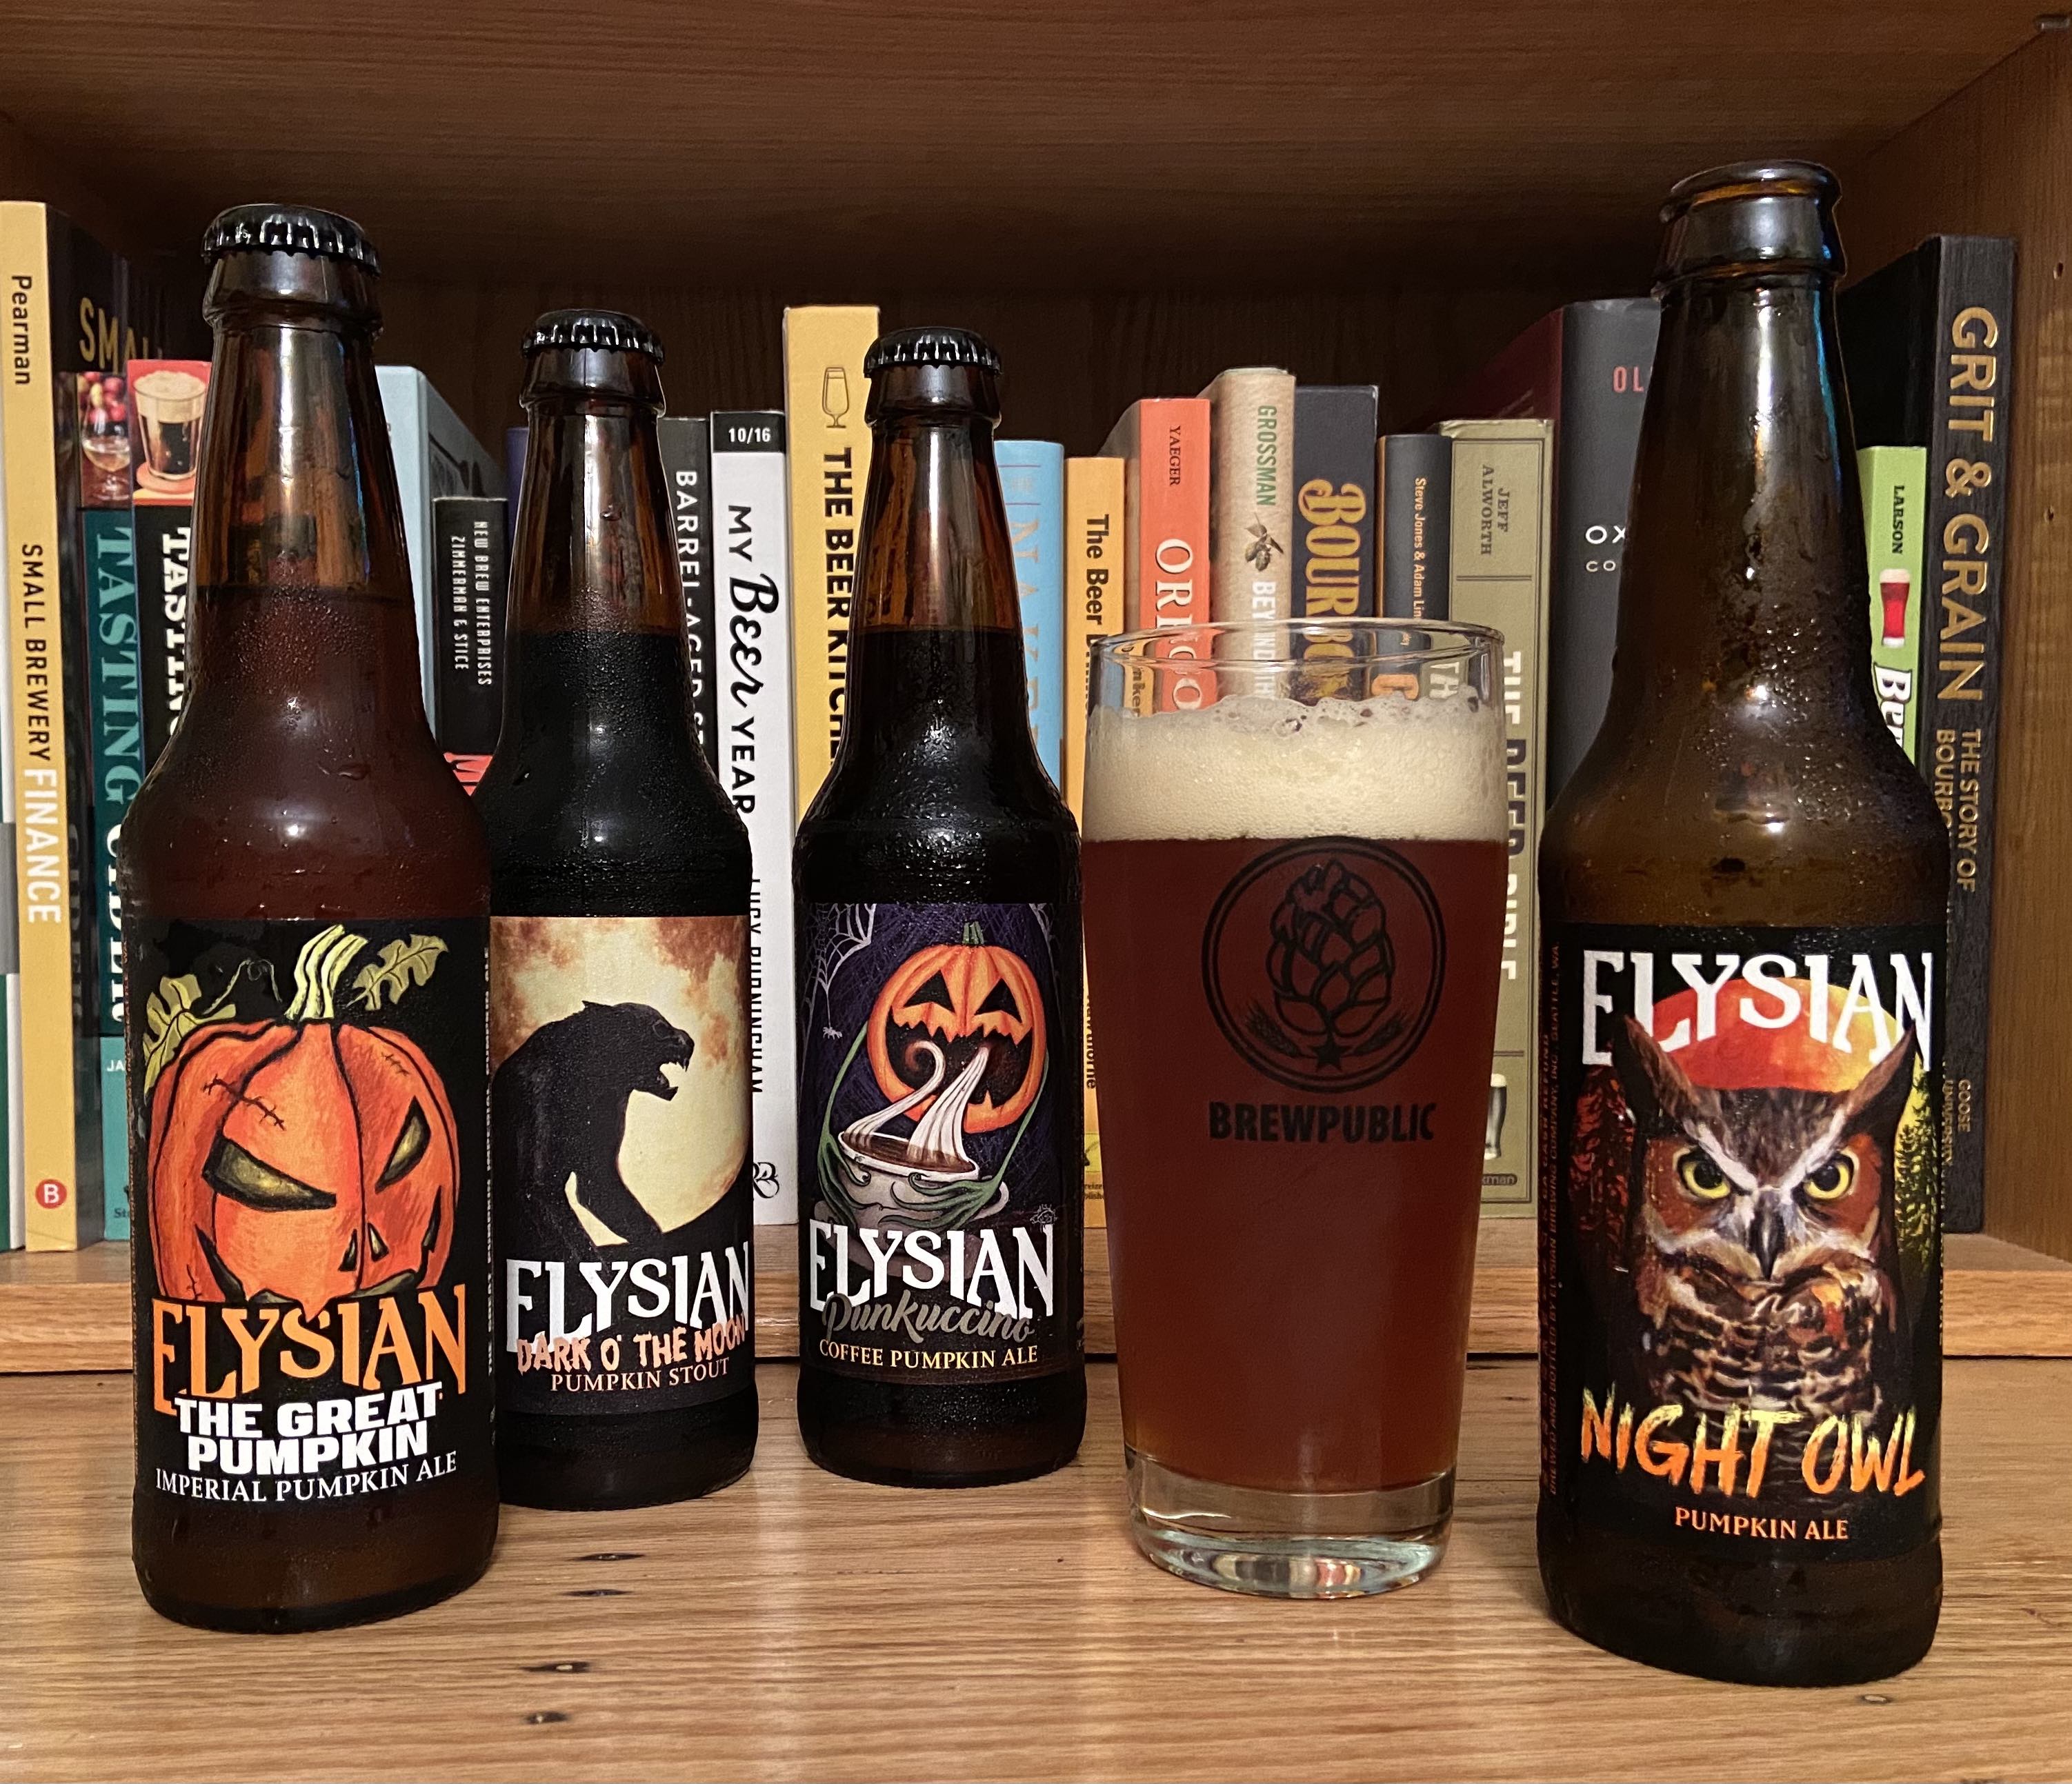 The 2020 Pumpkin Ale lineup from Elysian Brewing - The Great Pumpkin, Dark O' The Moon, Punkuccino, and Night Owl.